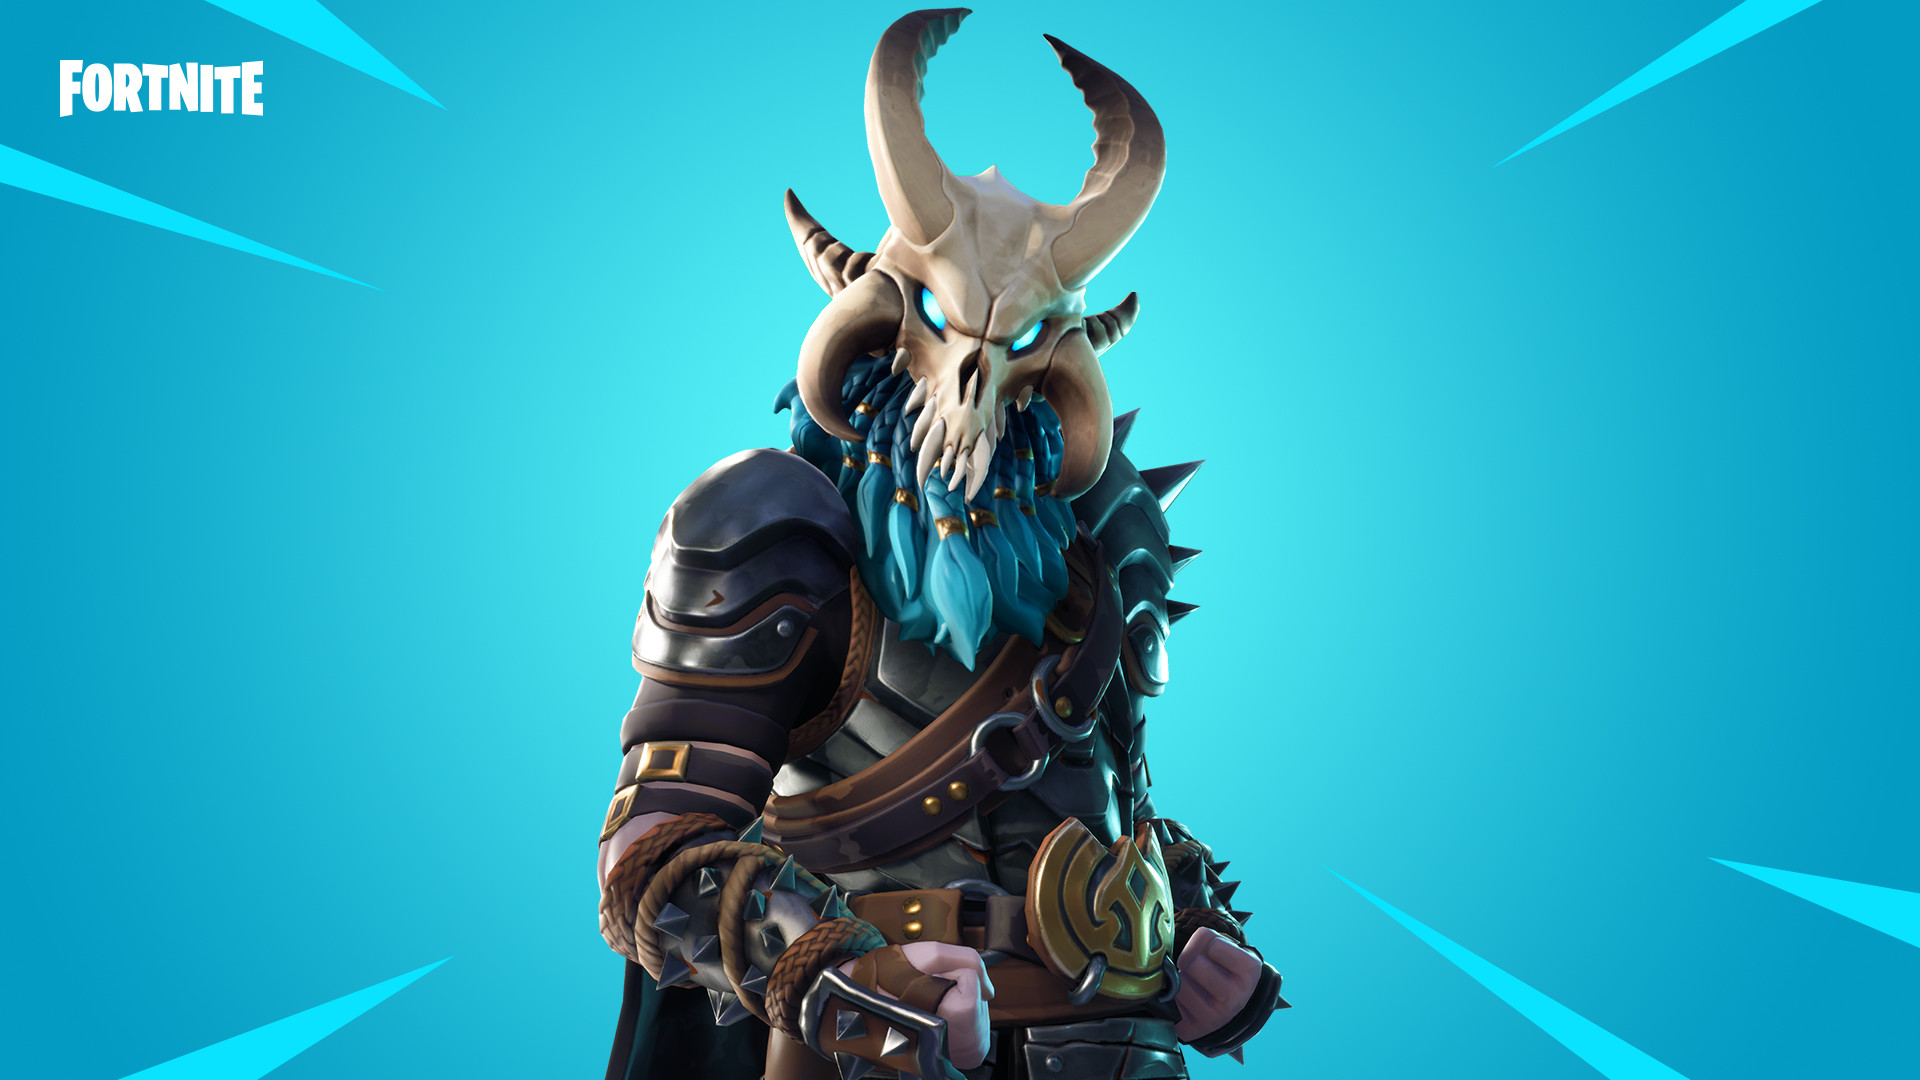 What Are The Fortnite Ragnarok Challenges And Can You Unlock